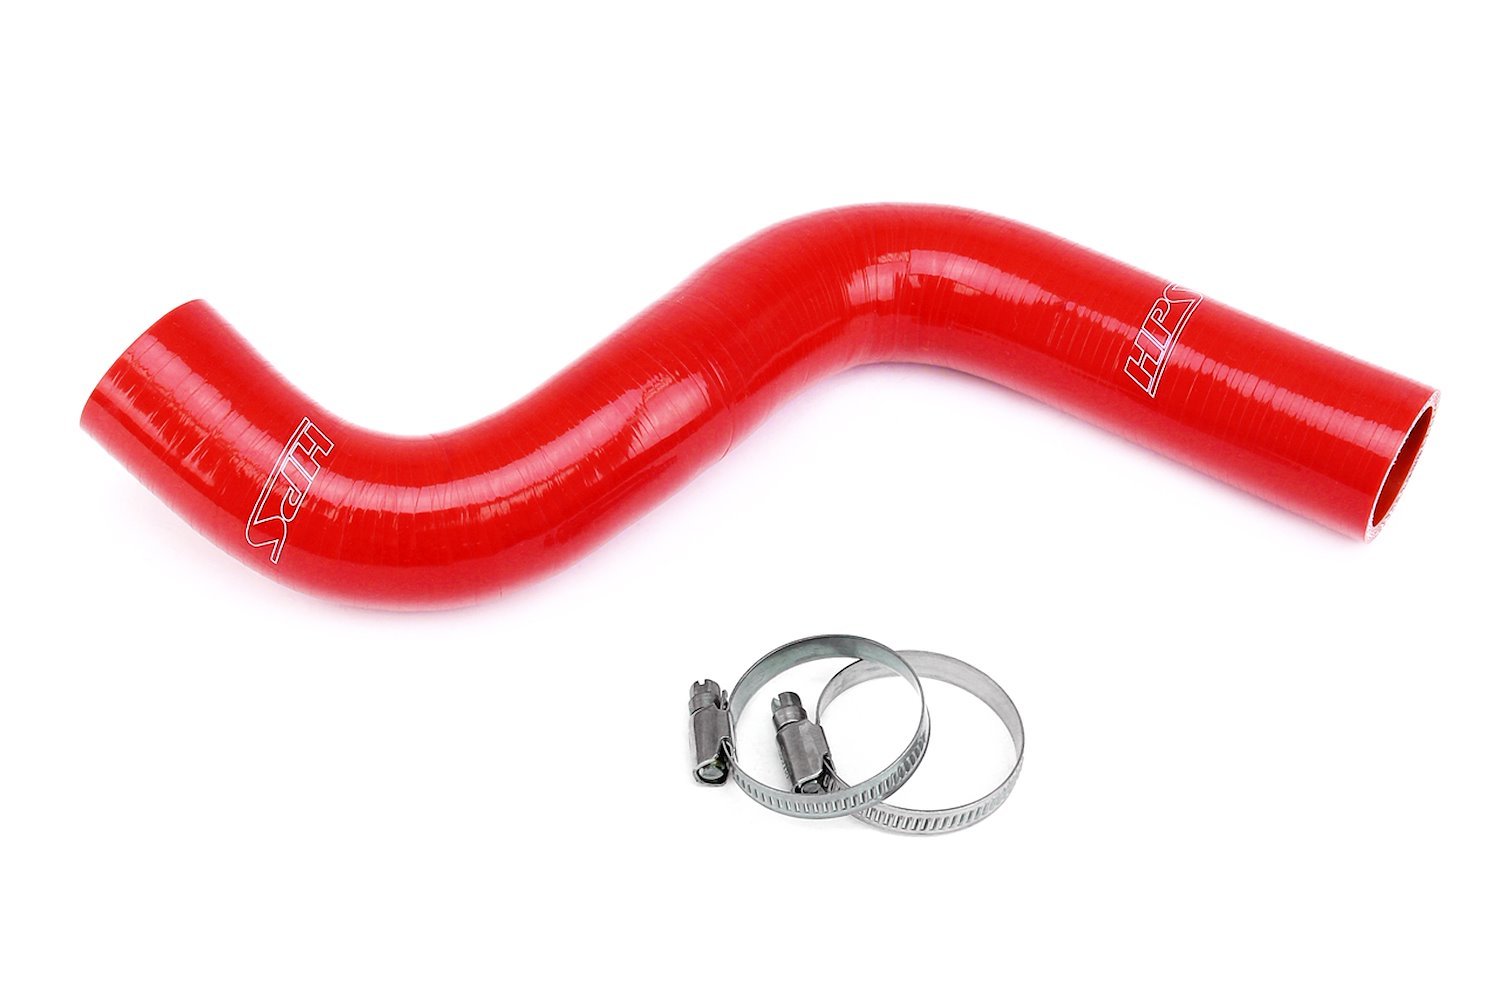 57-2061-RED Radiator Hose Kit, 3-Ply Reinforced Silicone, Replaces Rubber Upper Radiator Coolant Hose.